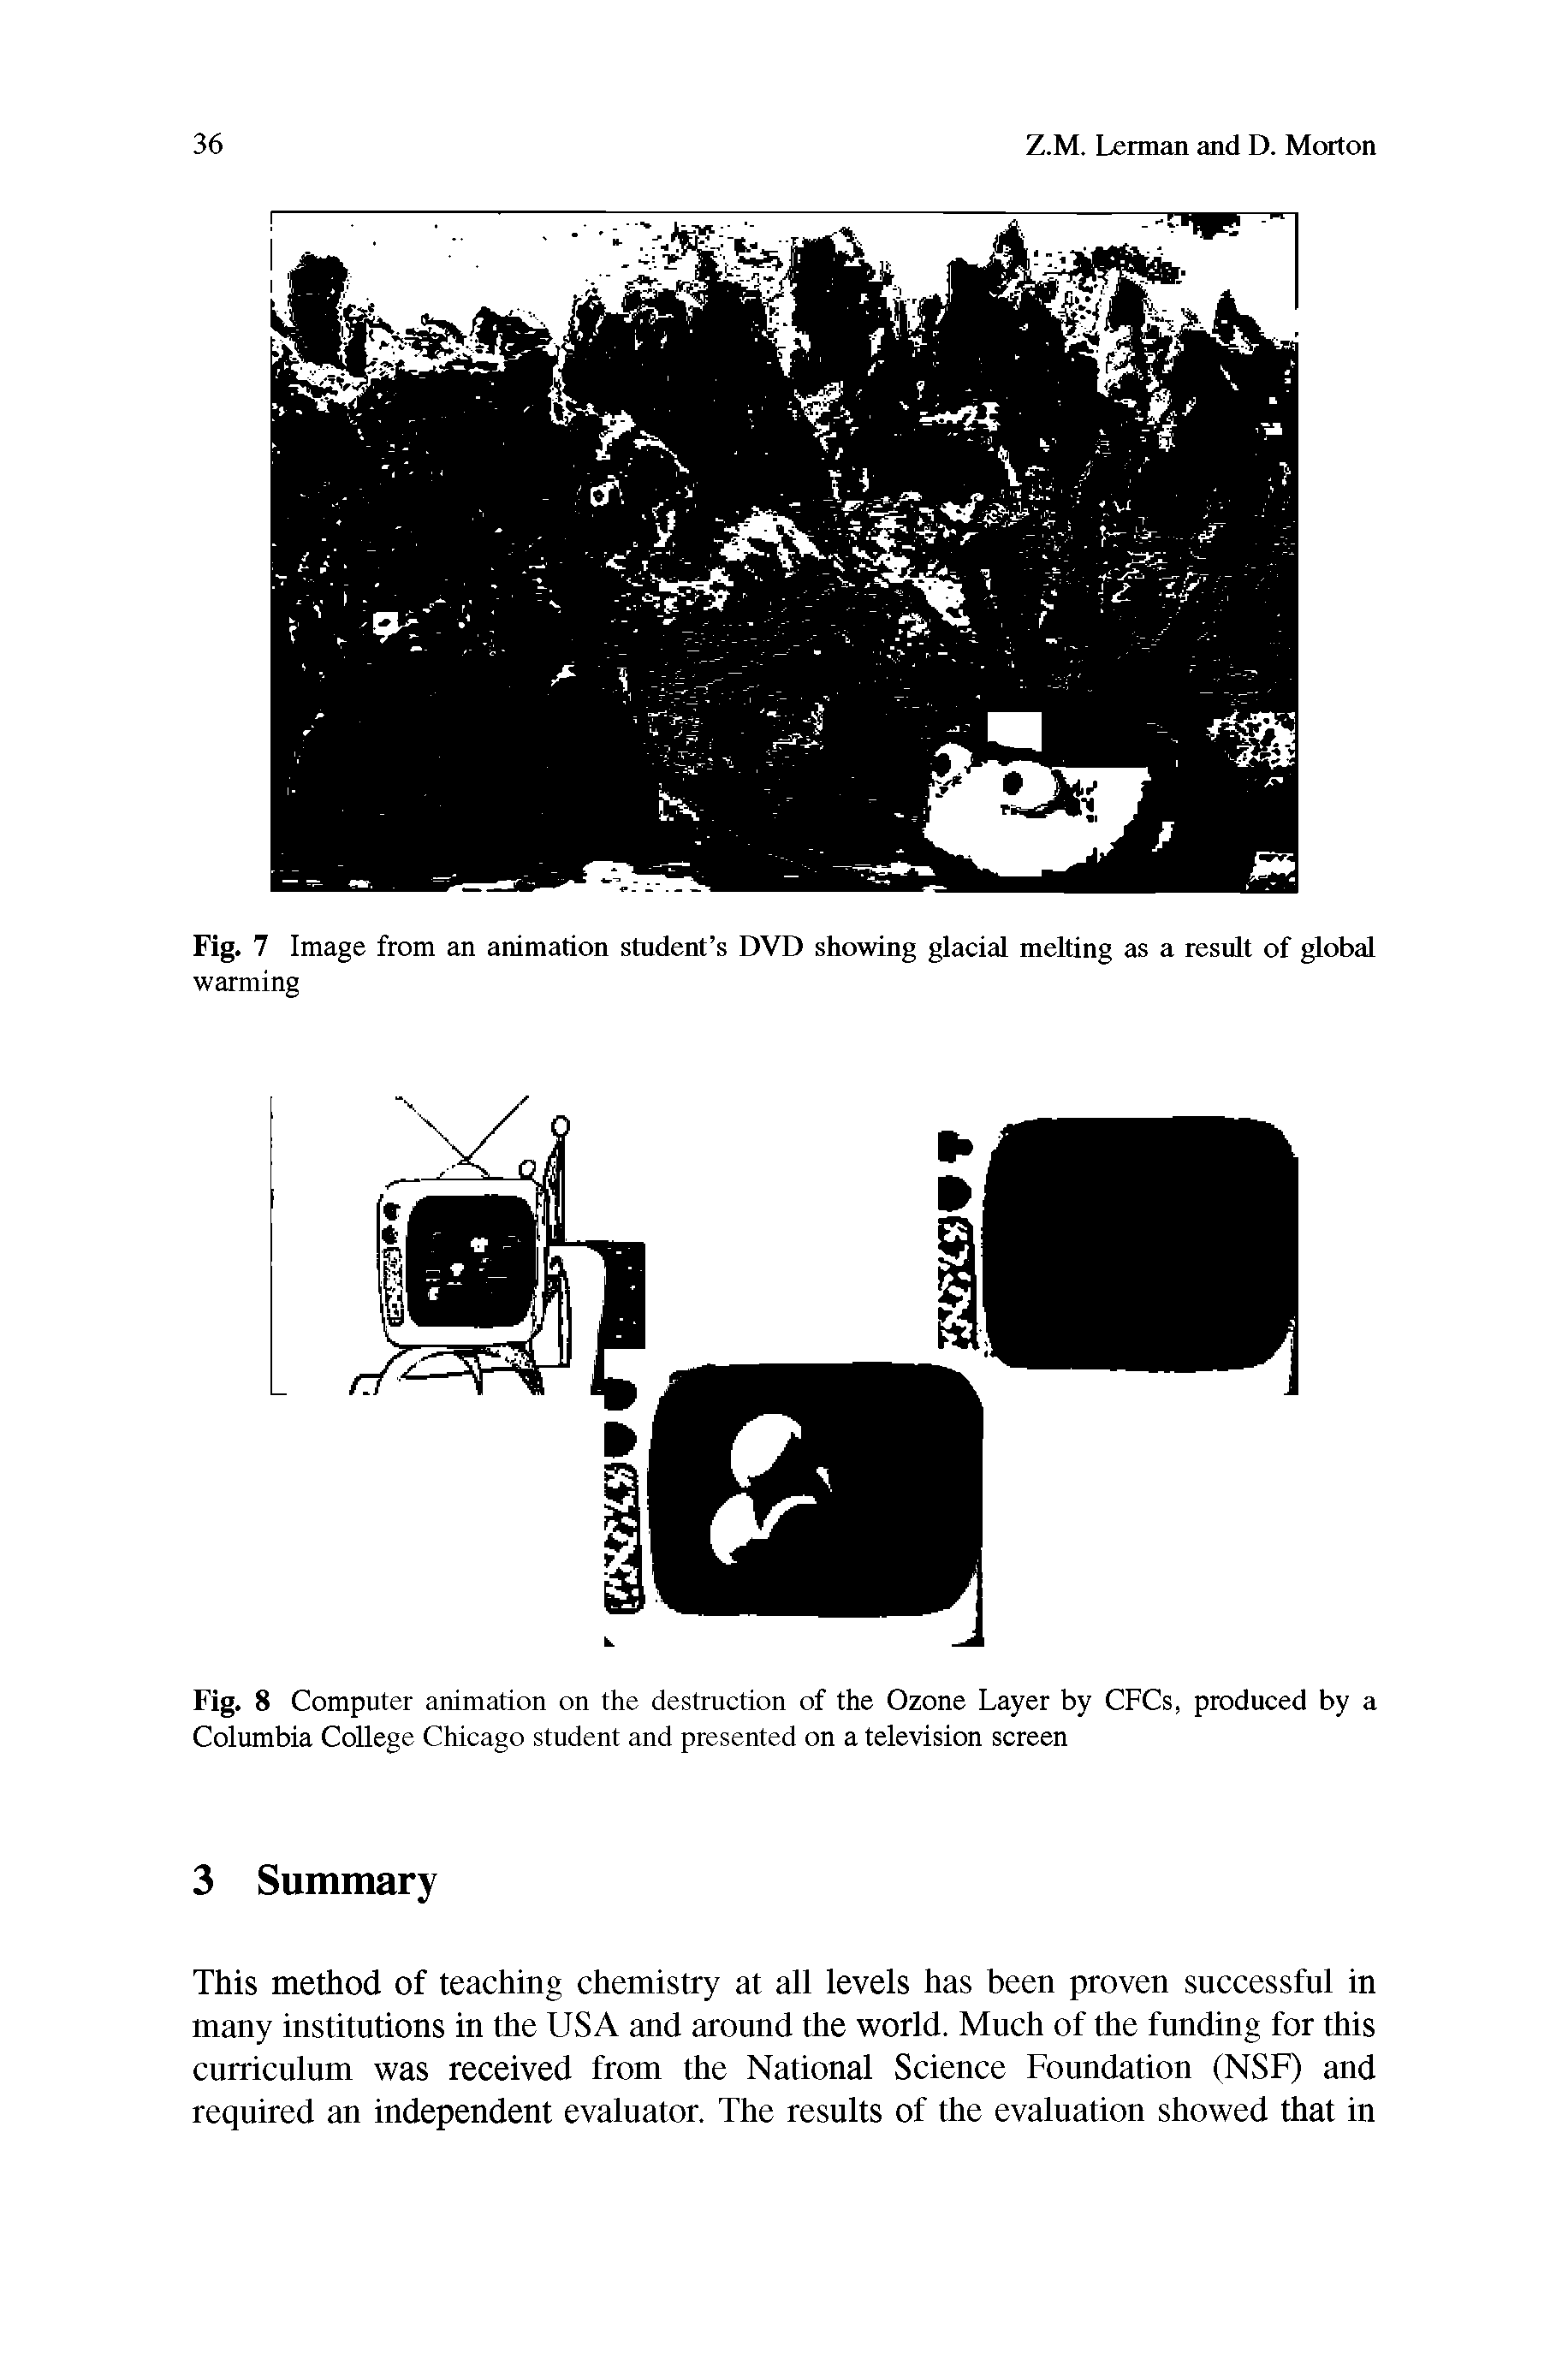 Fig. 8 Computer animation on the destruction of the Ozone Layer by CFCs, produced by a Columbia College Chicago student and presented on a television screen...